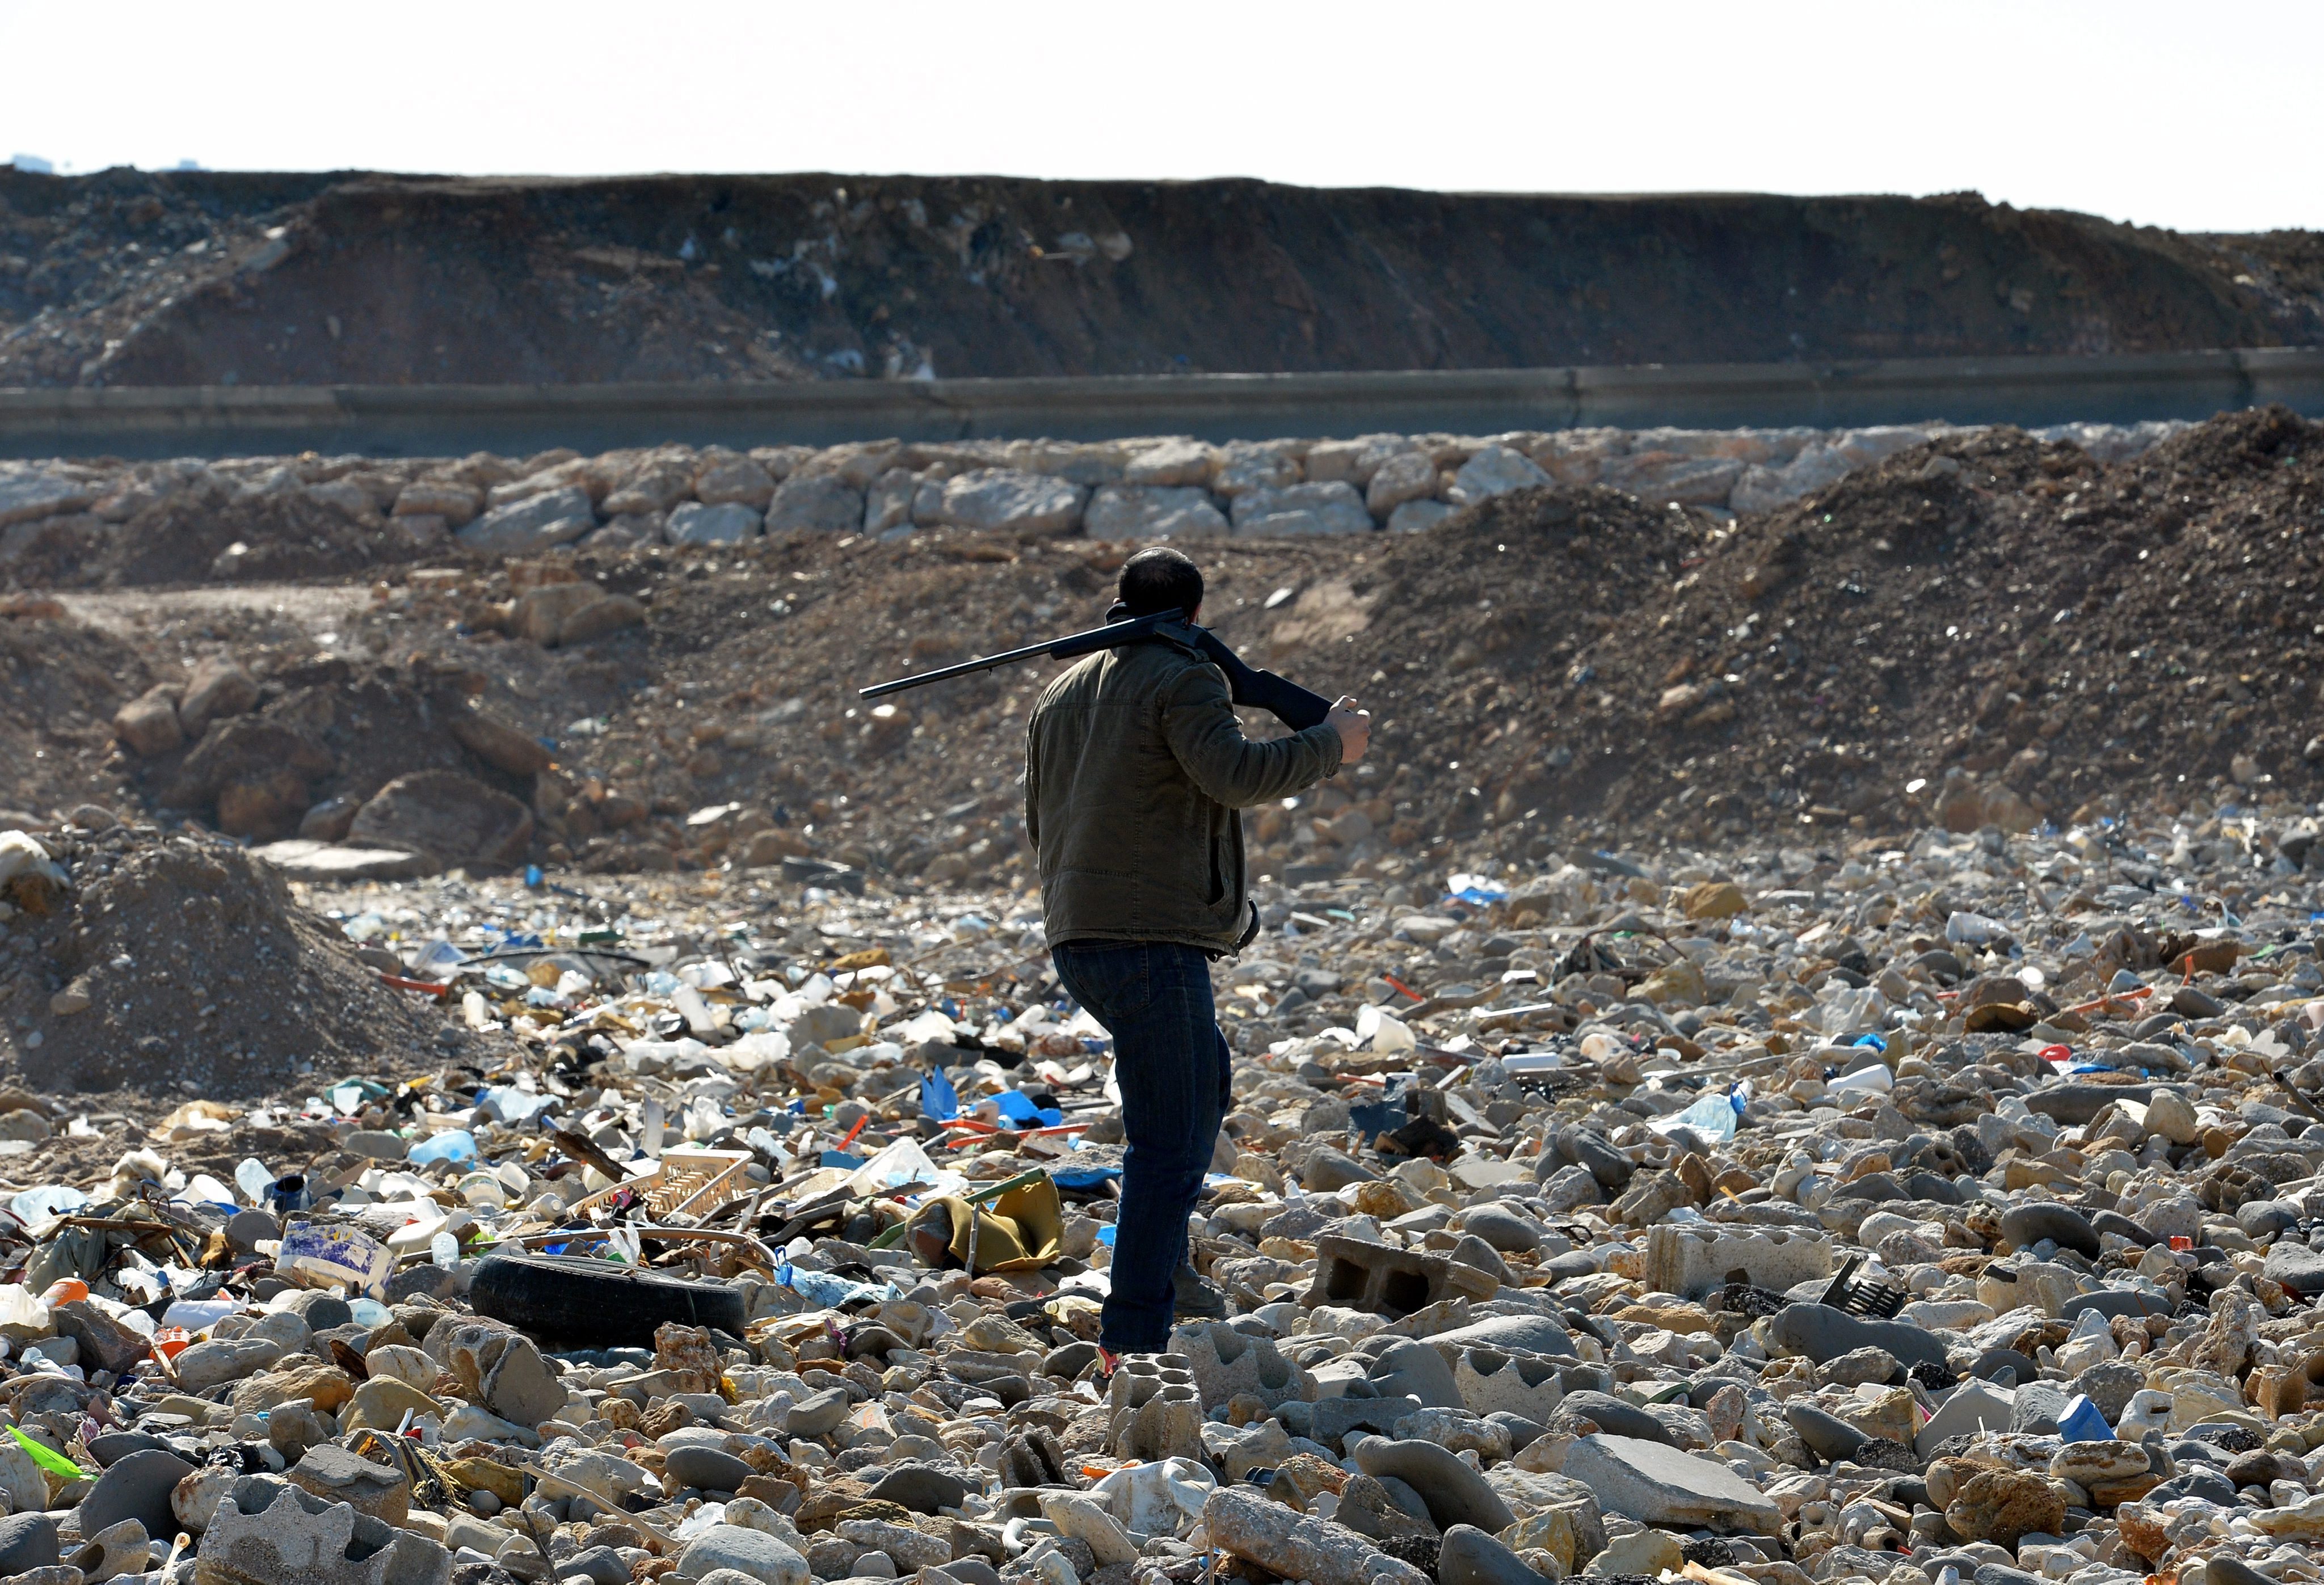 On average, Lebanon spends around $420 million per year on solid waste management.